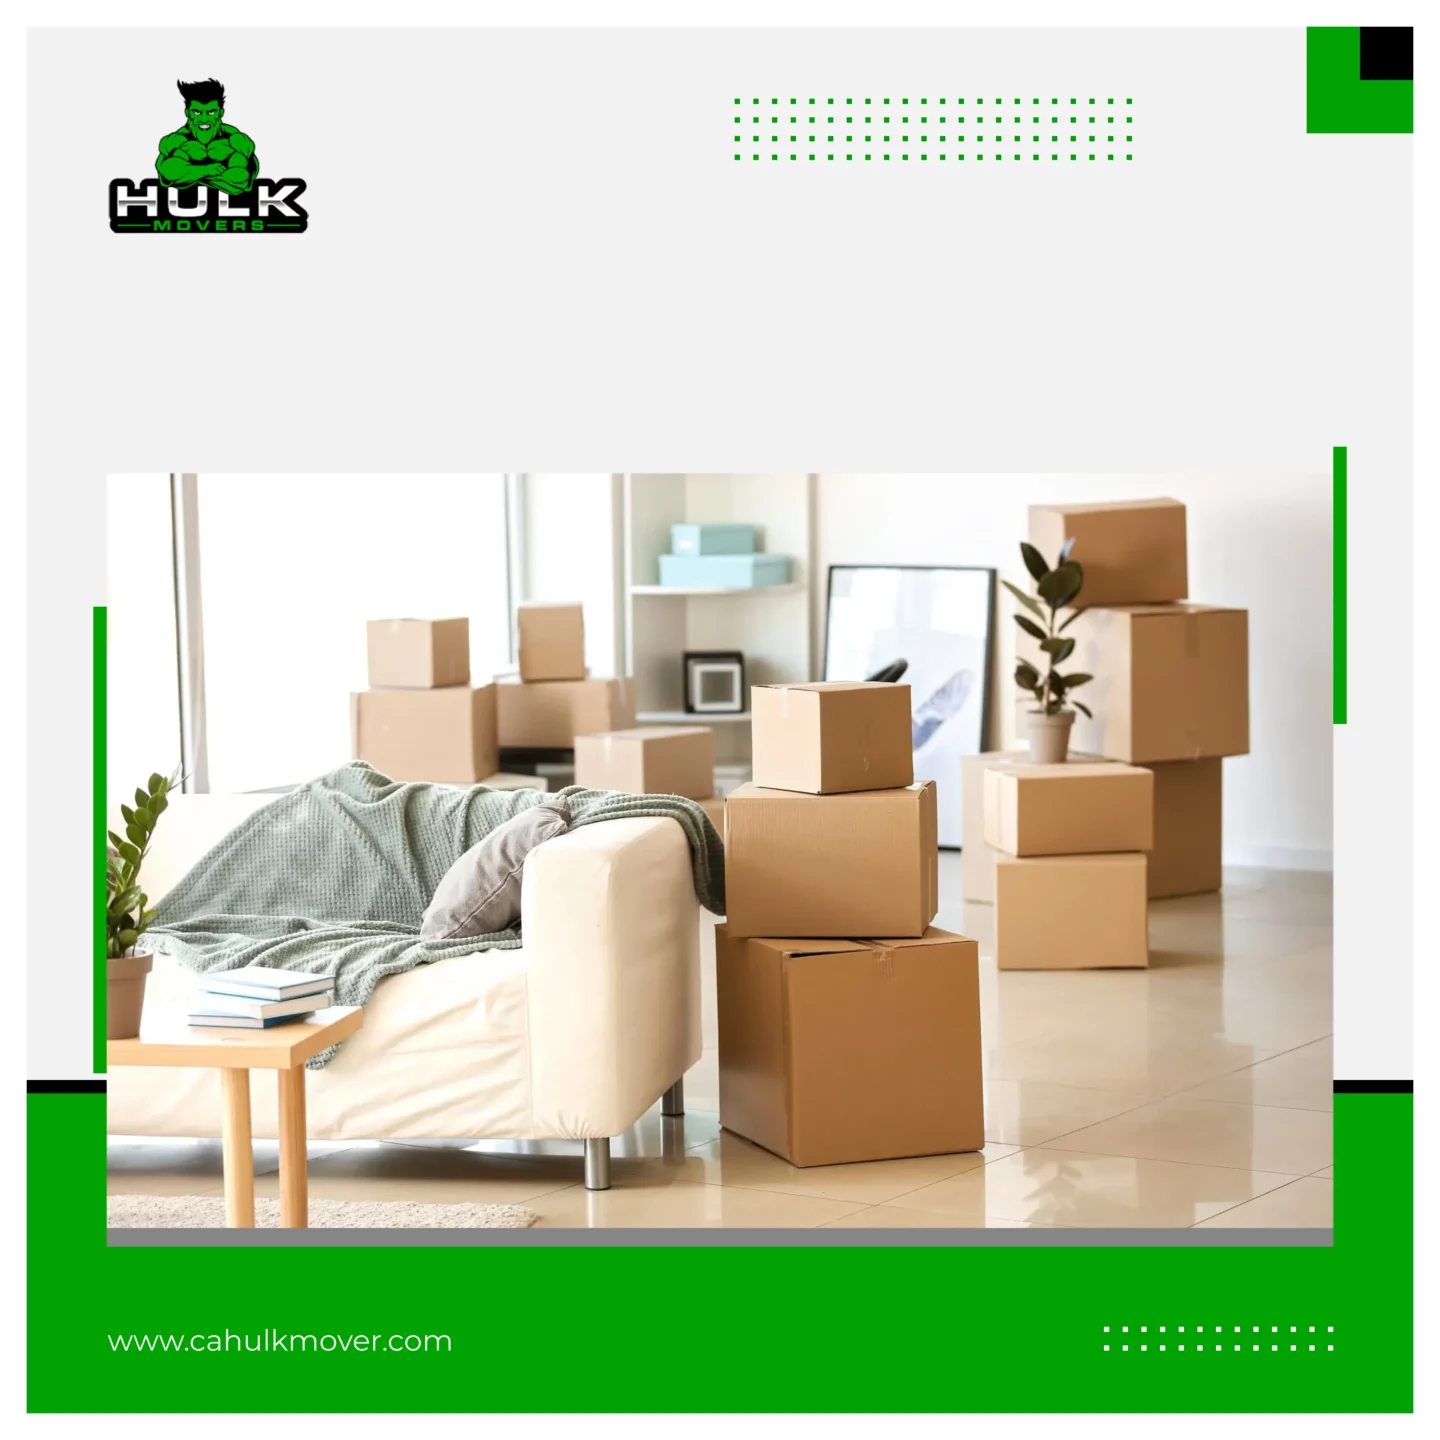 Movers Near Me: Trusted Professionals for Stress-Free Moving